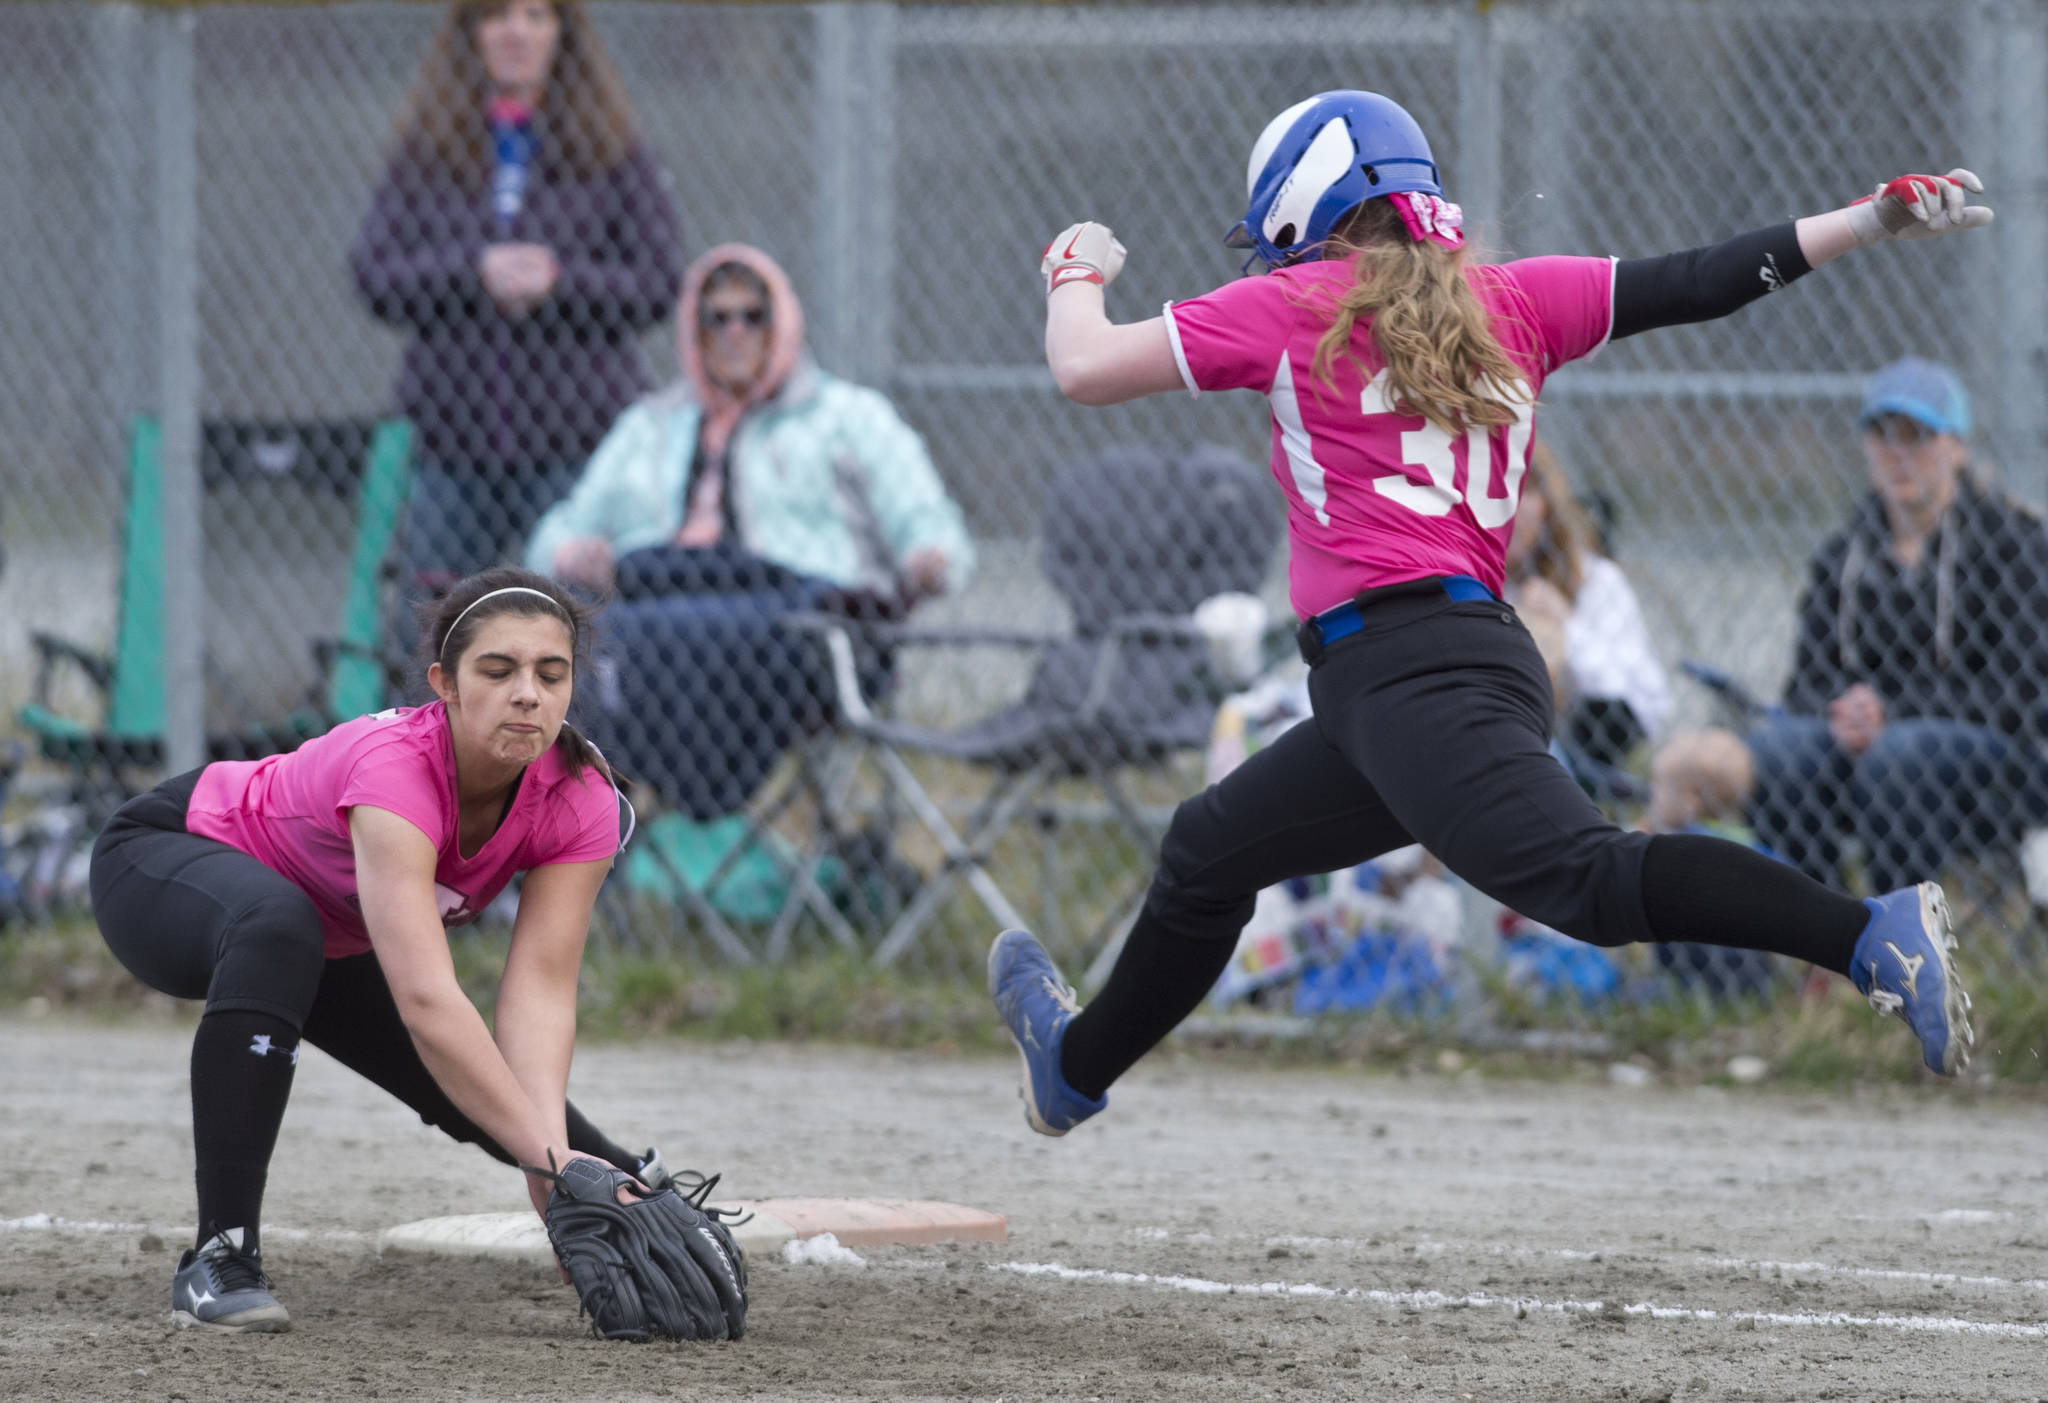 Thunder Mountain’s Rachel McCaulay makes a leap for first base as Juneau-Douglas’ Leah Spargo makes the catch for the out at Melvin Park on Friday, May 5, 2017. (Michael Penn | Juneau Empire)